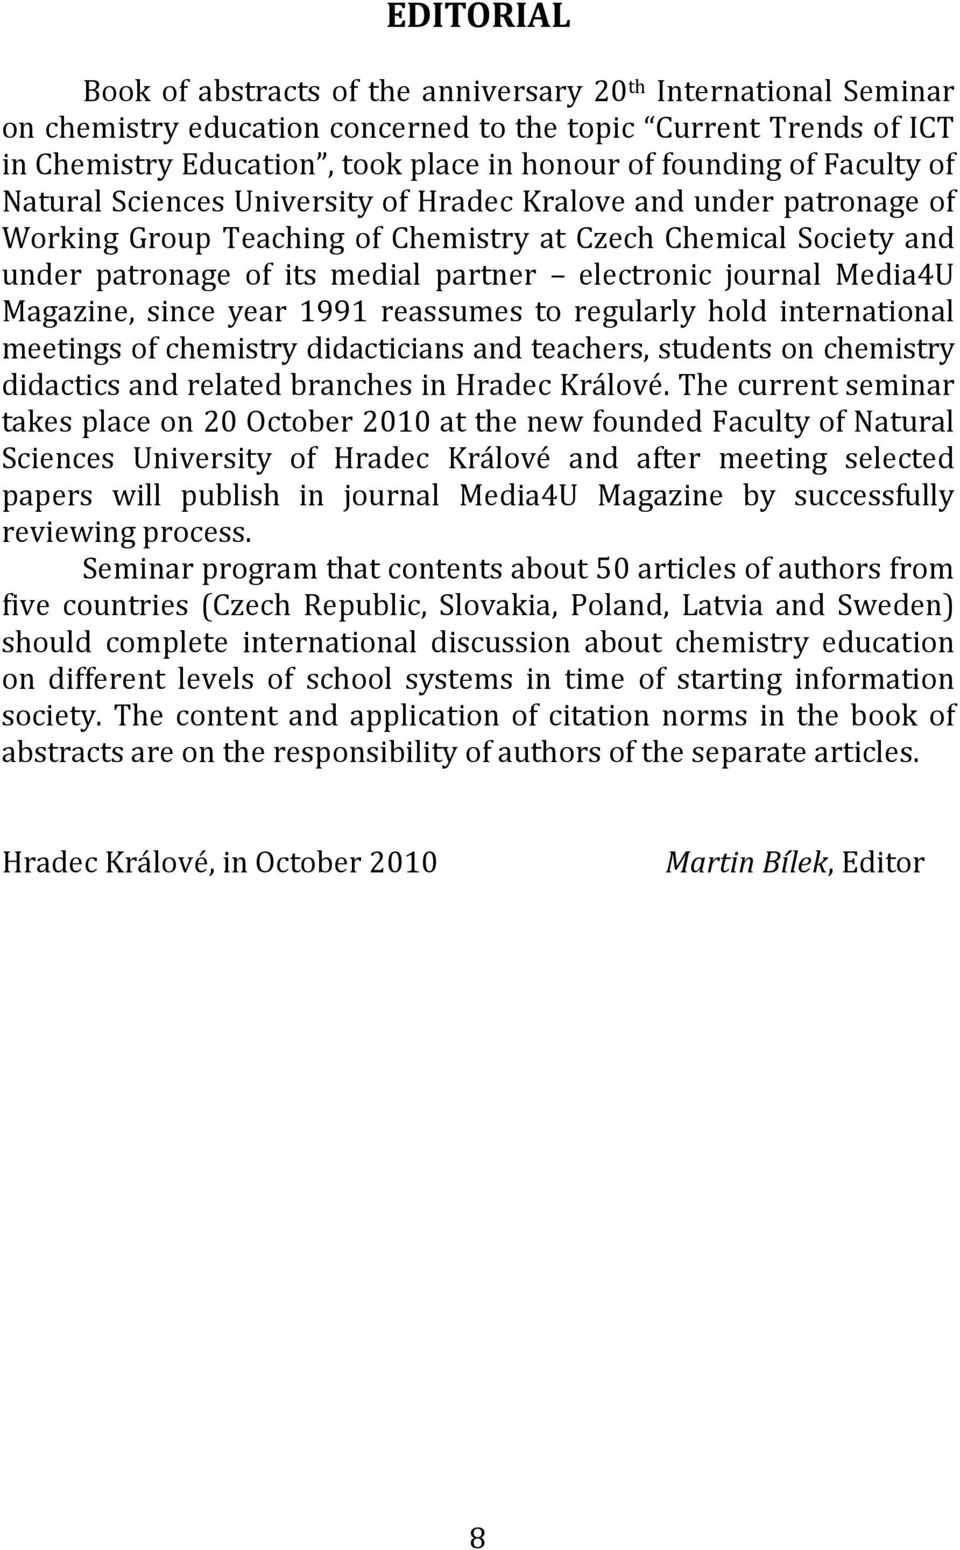 journal Media4U Magazine, since year 1991 reassumes to regularly hold international meetings of chemistry didacticians and teachers, students on chemistry didactics and related branches in Hradec